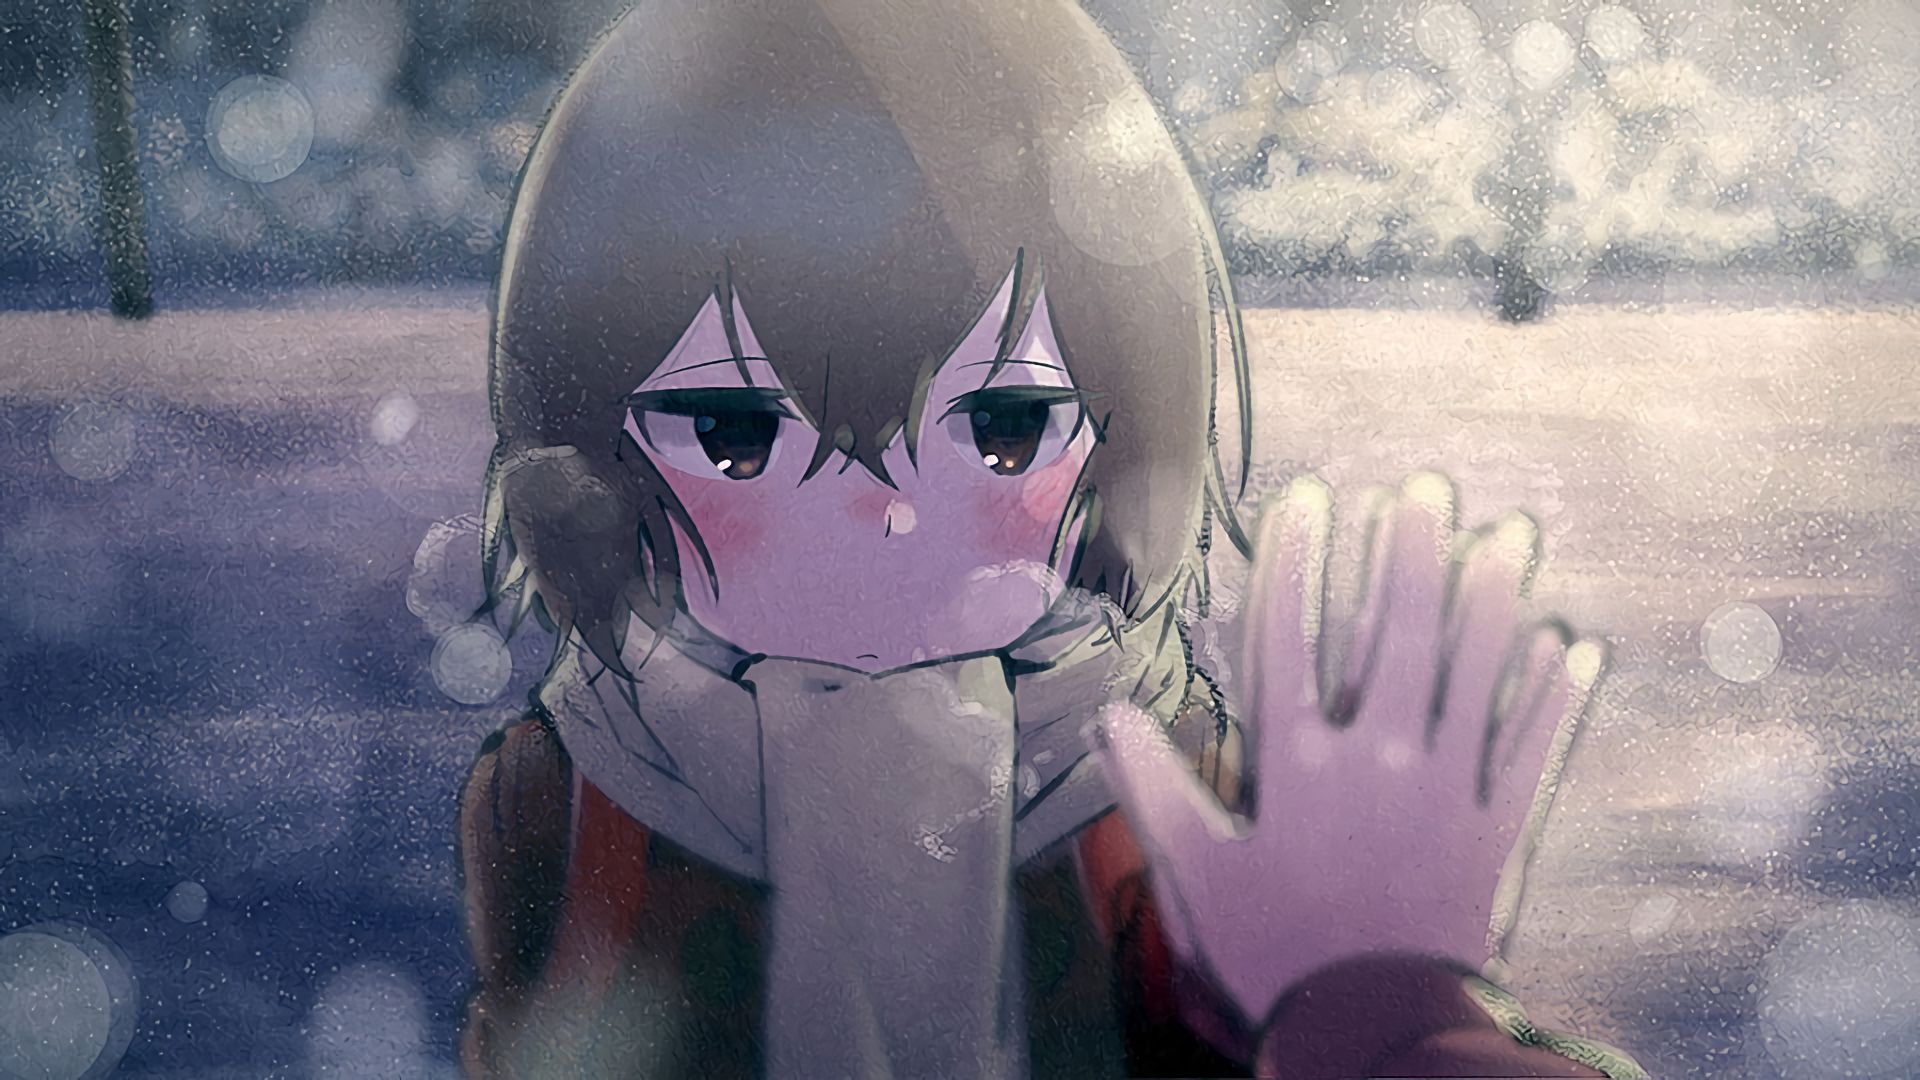 Download The Rival Characters In Erased Wallpaper